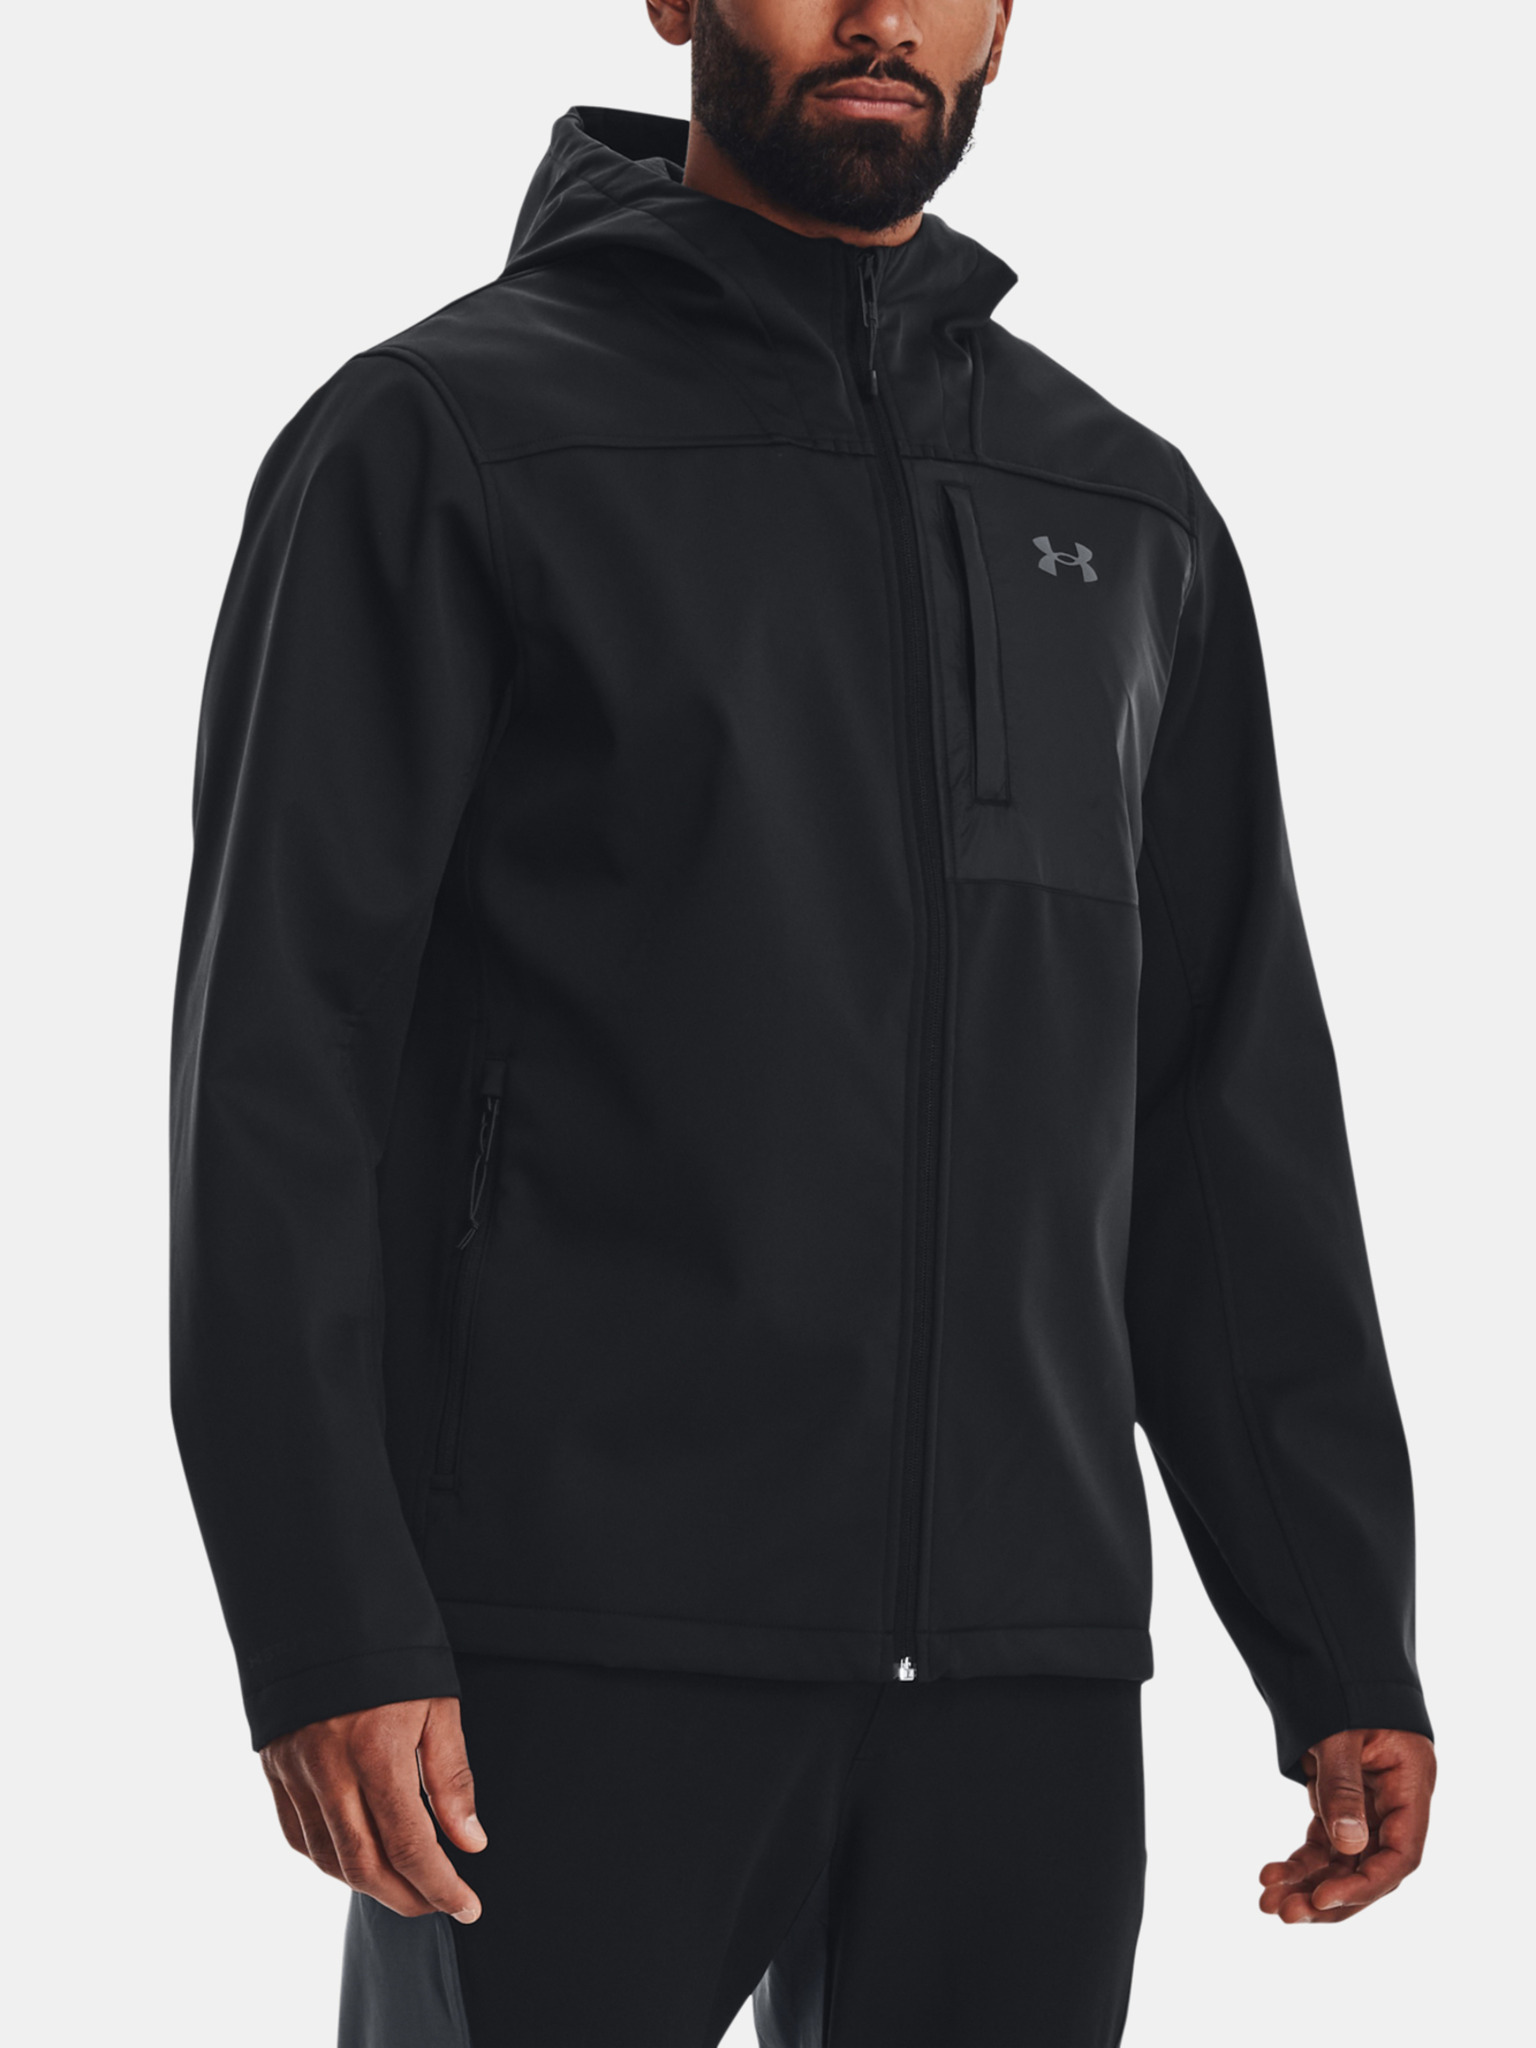 Under Armour Men's ColdGear Infrared Shield 2.0 Soft Shell, (299